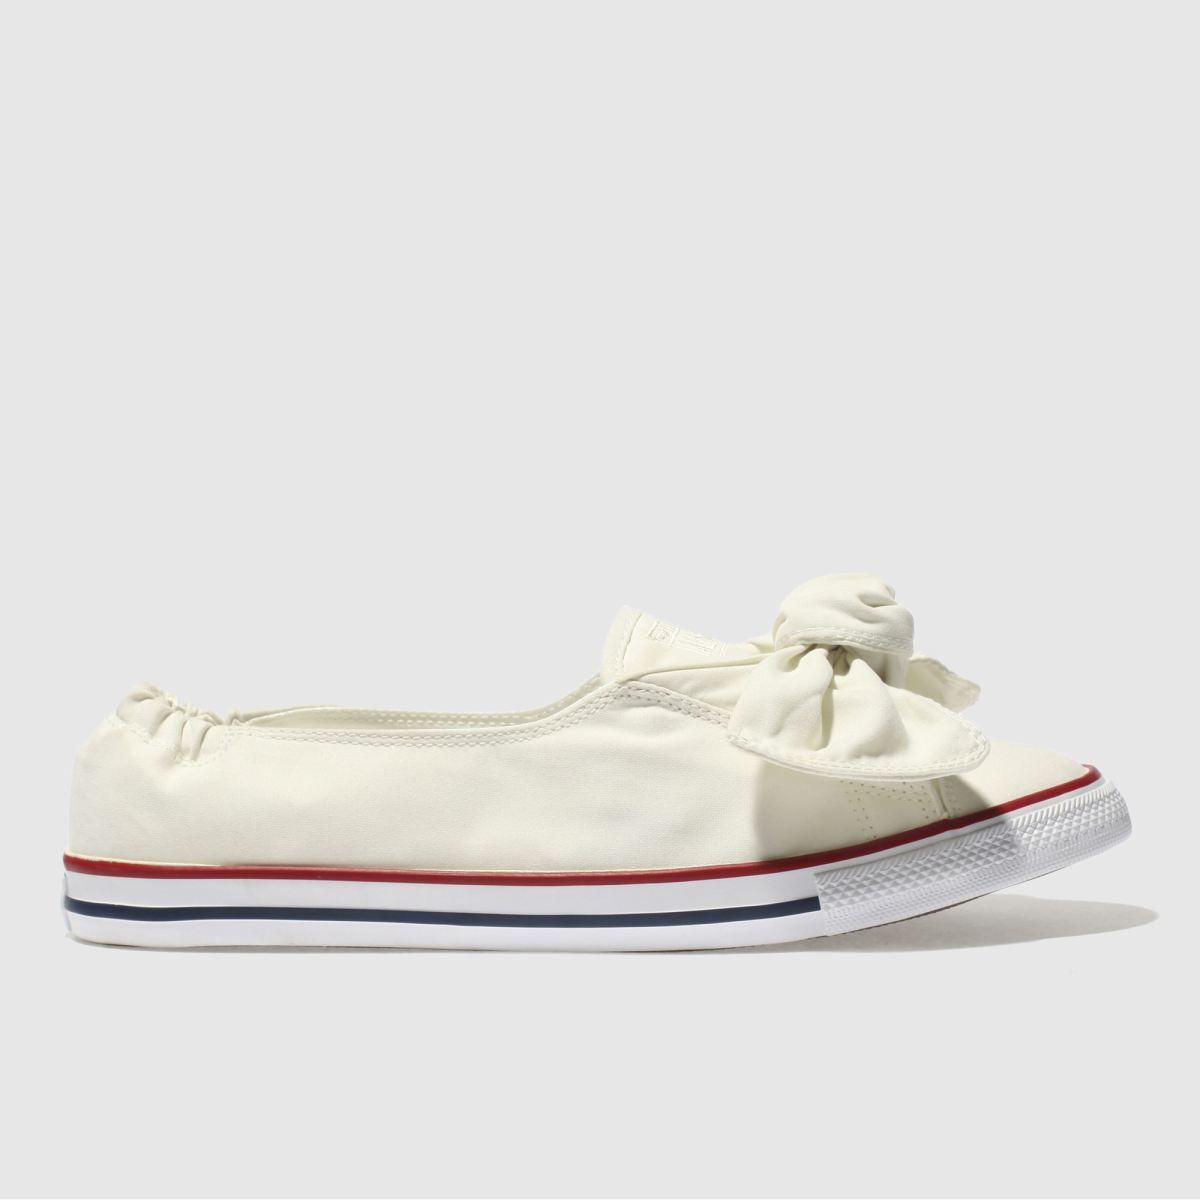 converse chuck taylor all star knot brushed twill low top